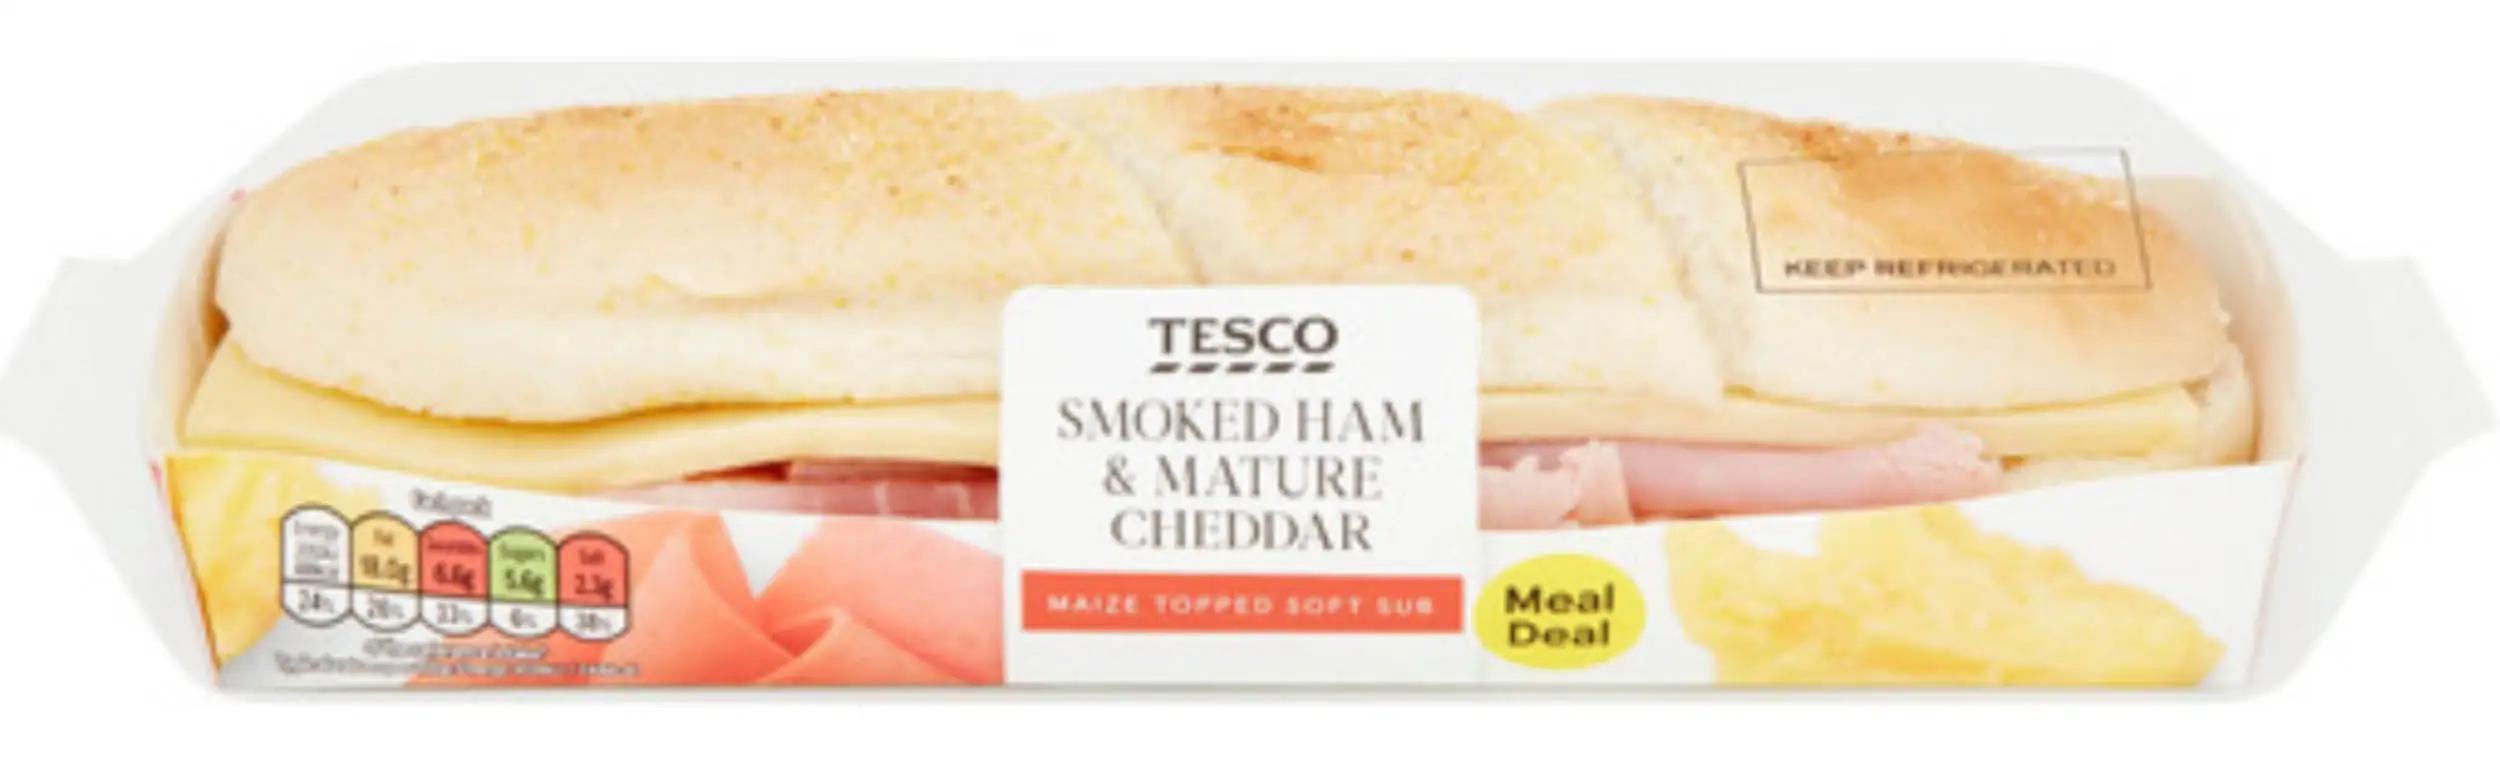 tesco smoked ham and mature cheddar sub - How many calories in a Tesco cheese sandwich